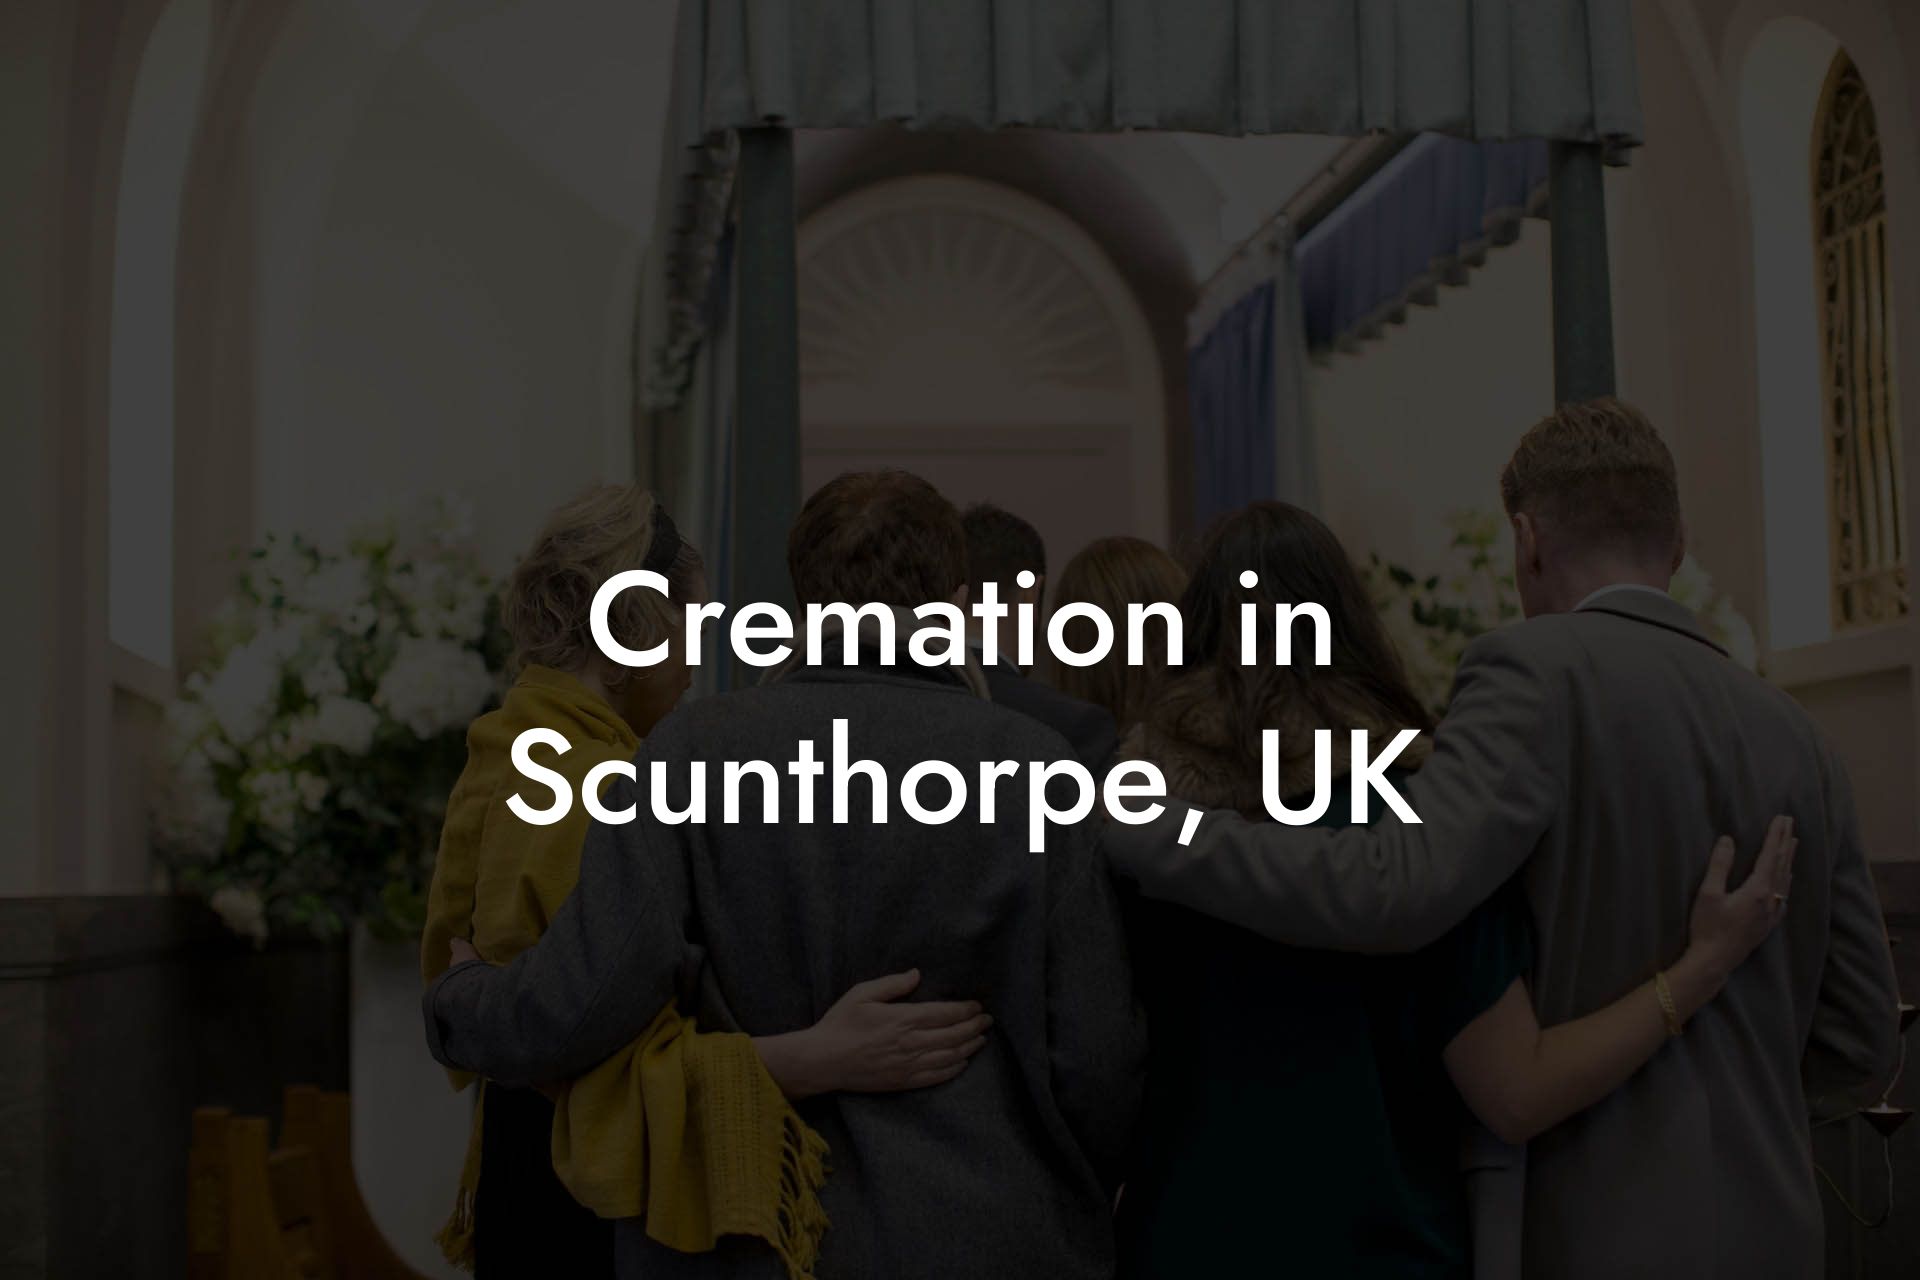 Cremation in Scunthorpe, UK